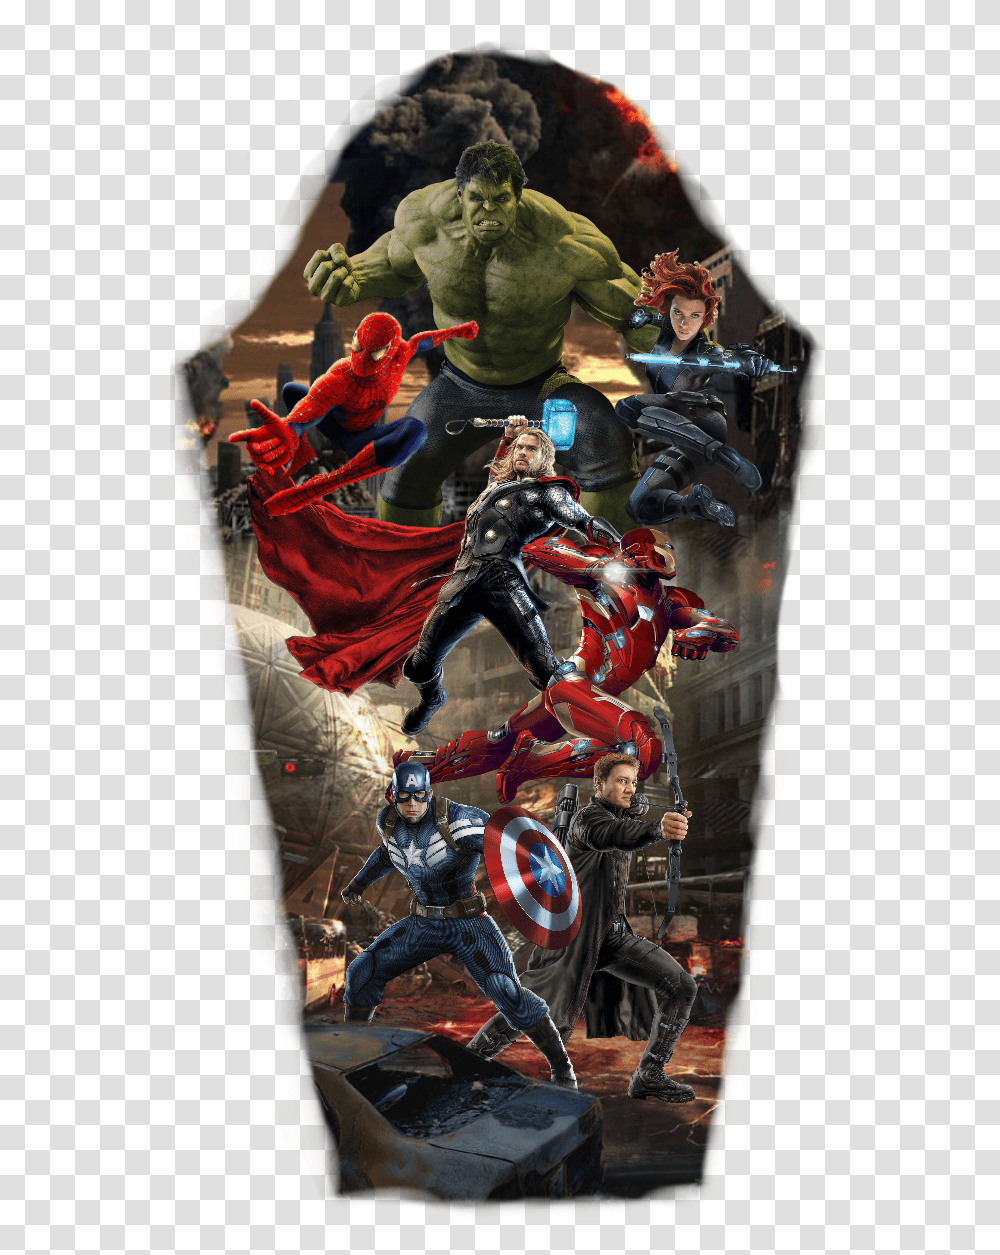 Avengers Sleeve Tattoos In Avengers Sleeve Tattoo Designs, Person, Batman, Poster, Advertisement Transparent Png